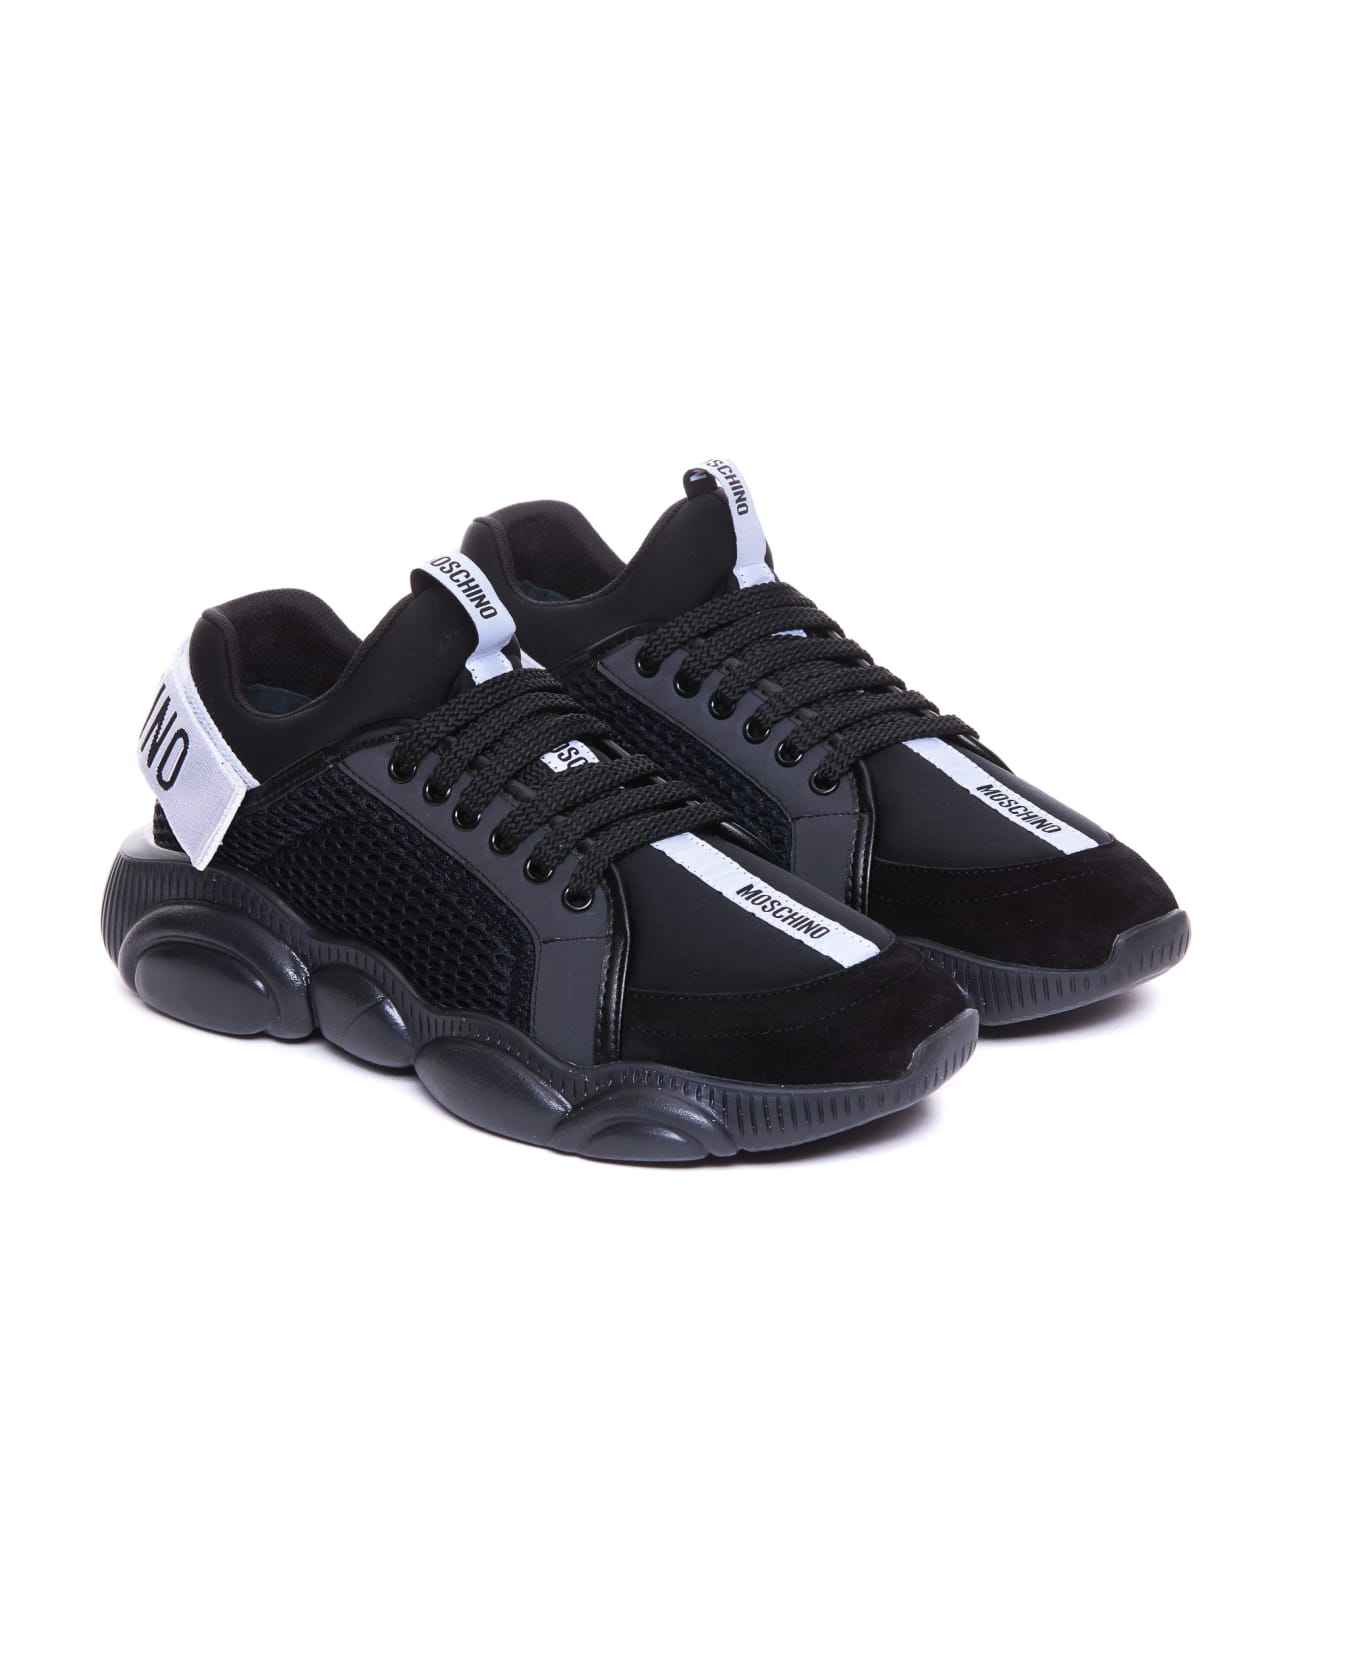 Moschino Teddy Sneakers - Black